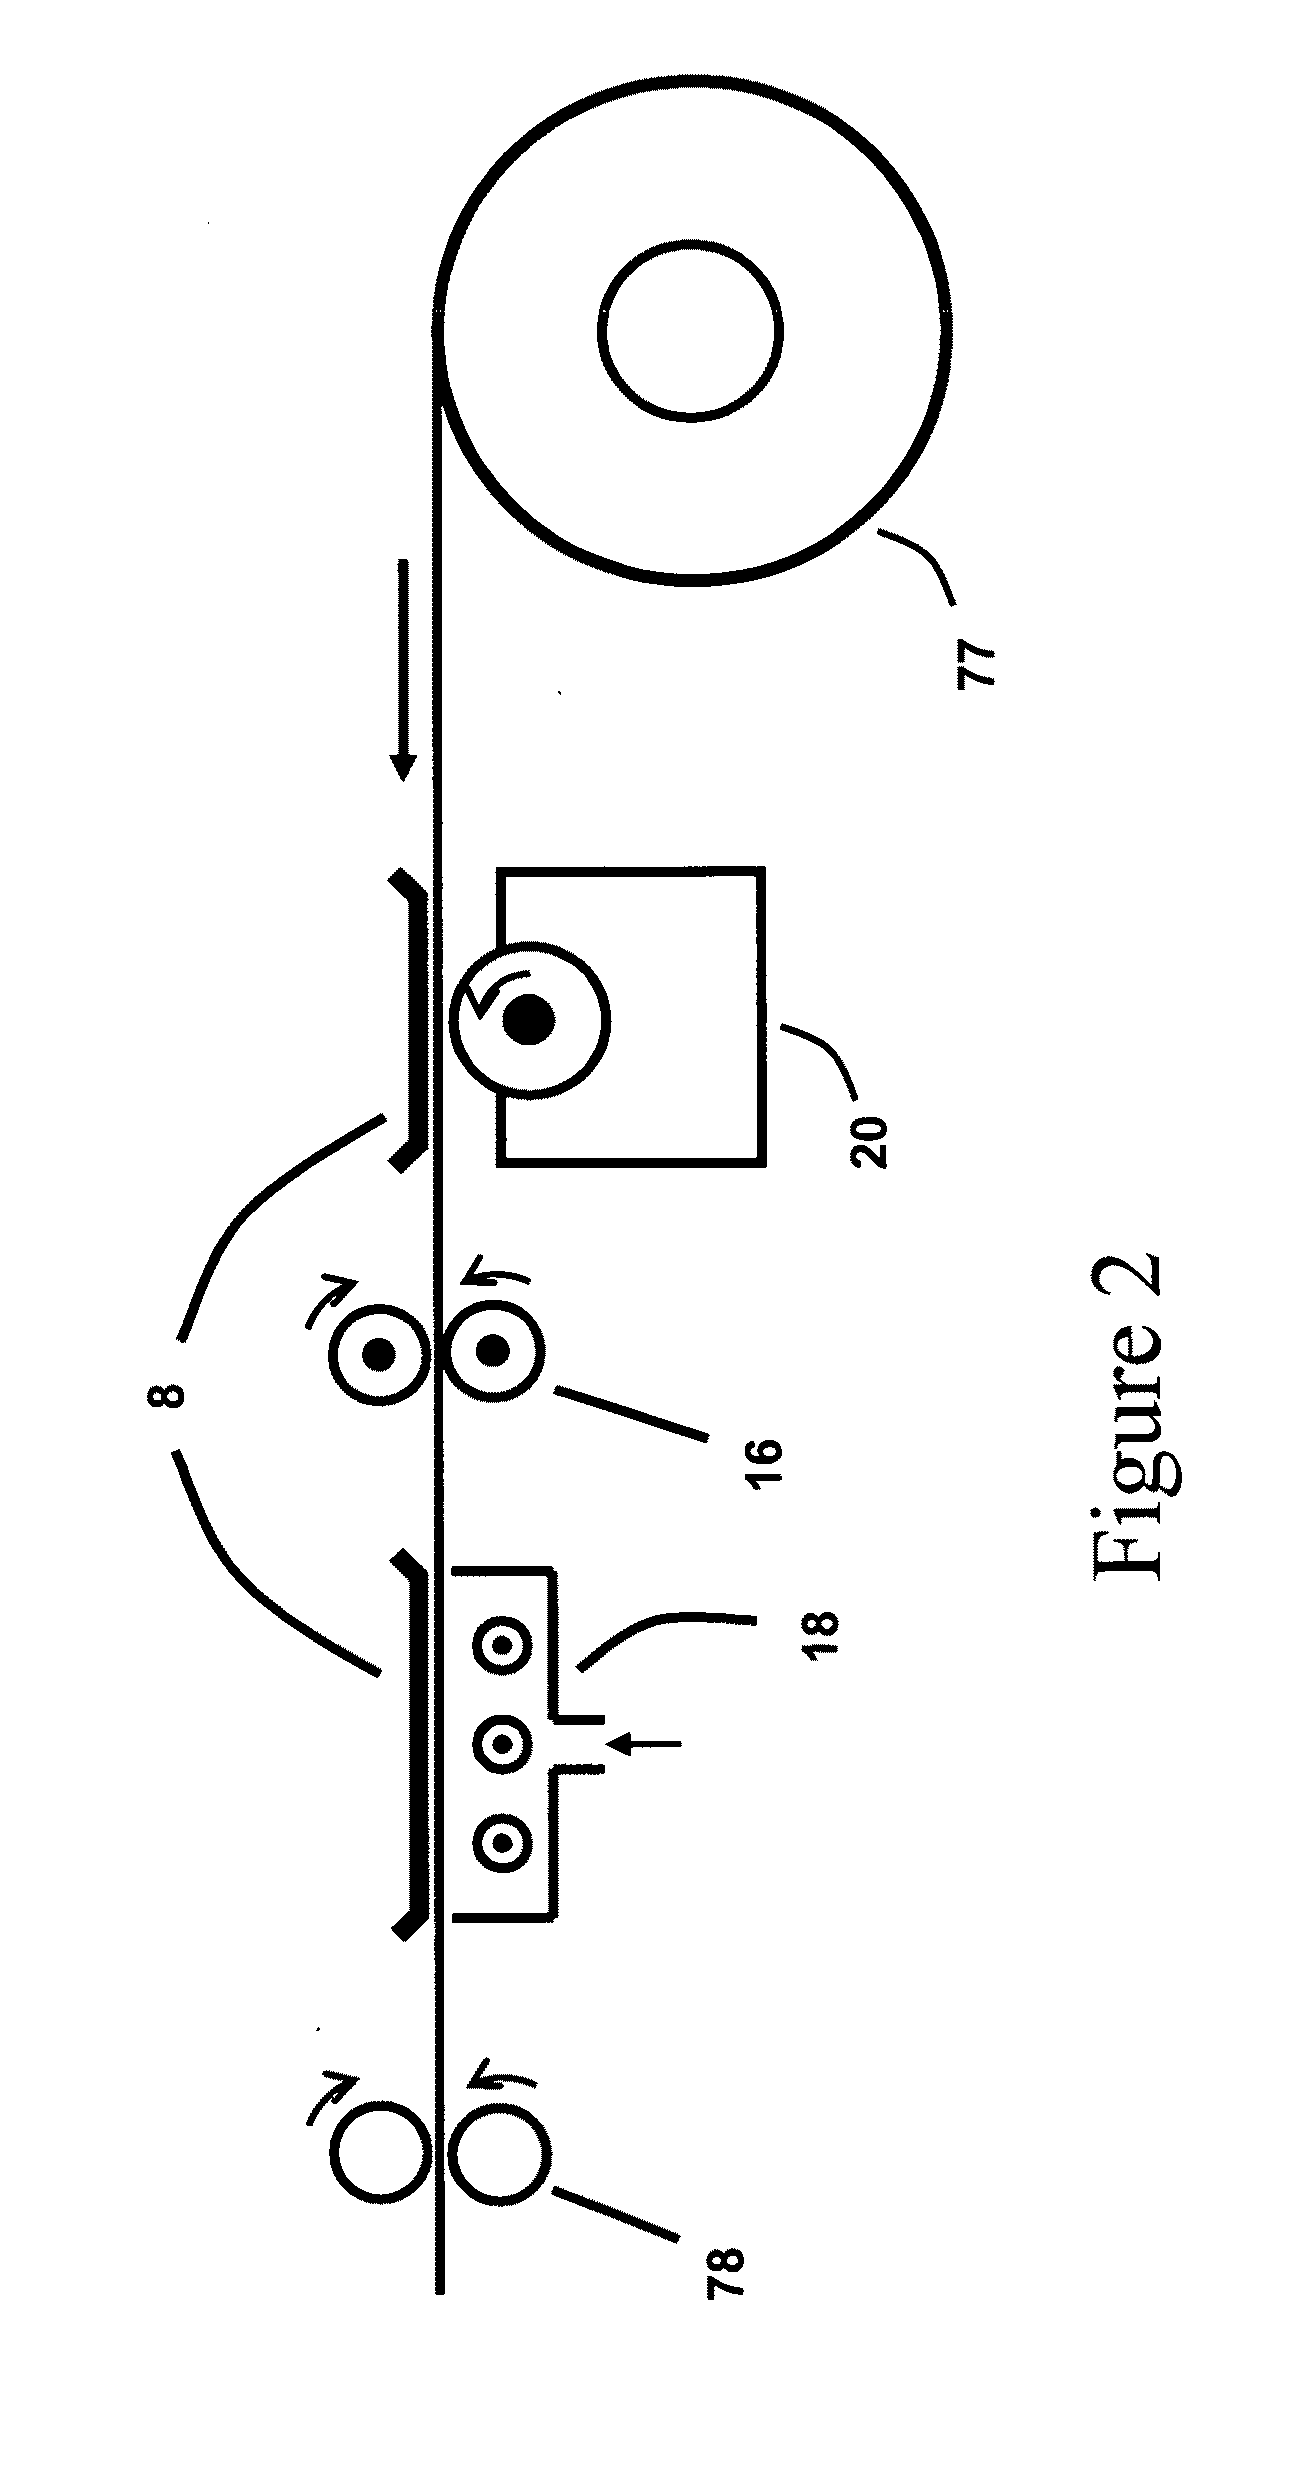 Non-interactive electrostatic deposition of induction charged conductive powder